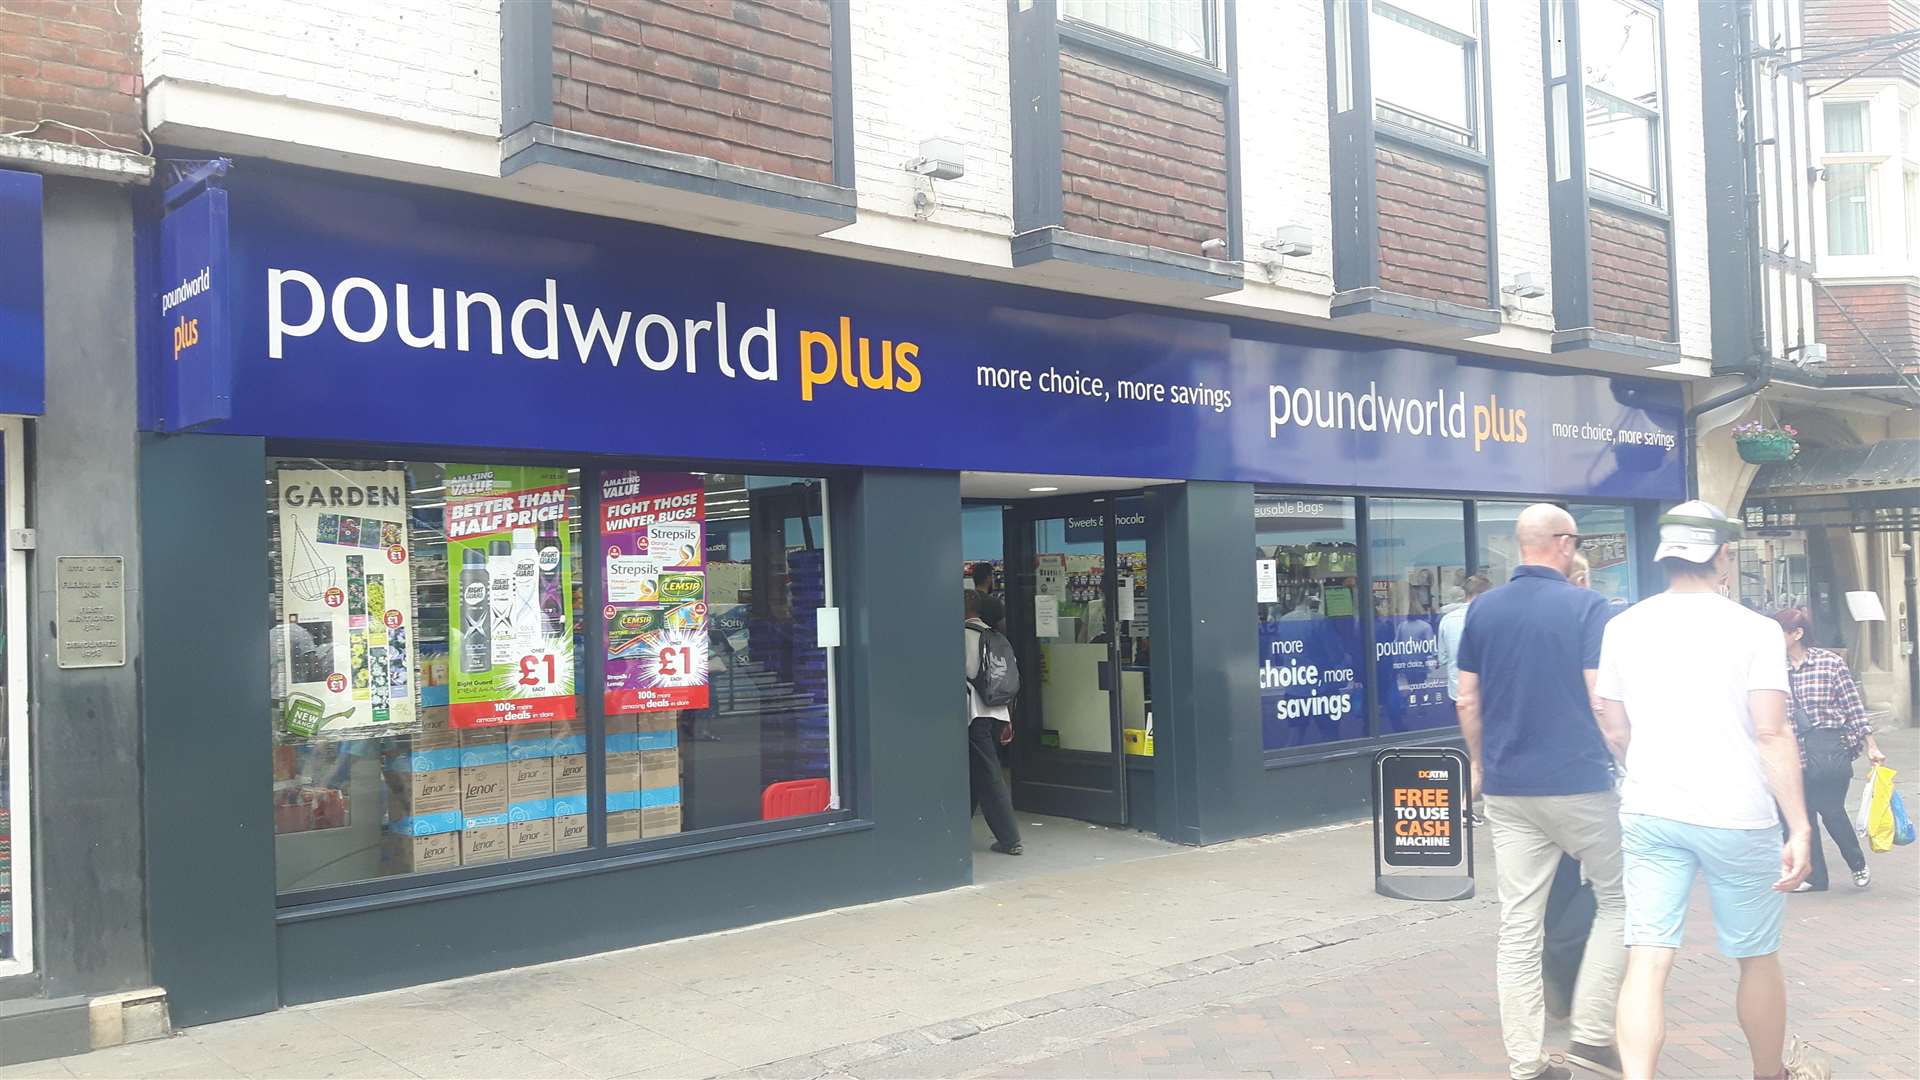 Poundworld has gone into administration